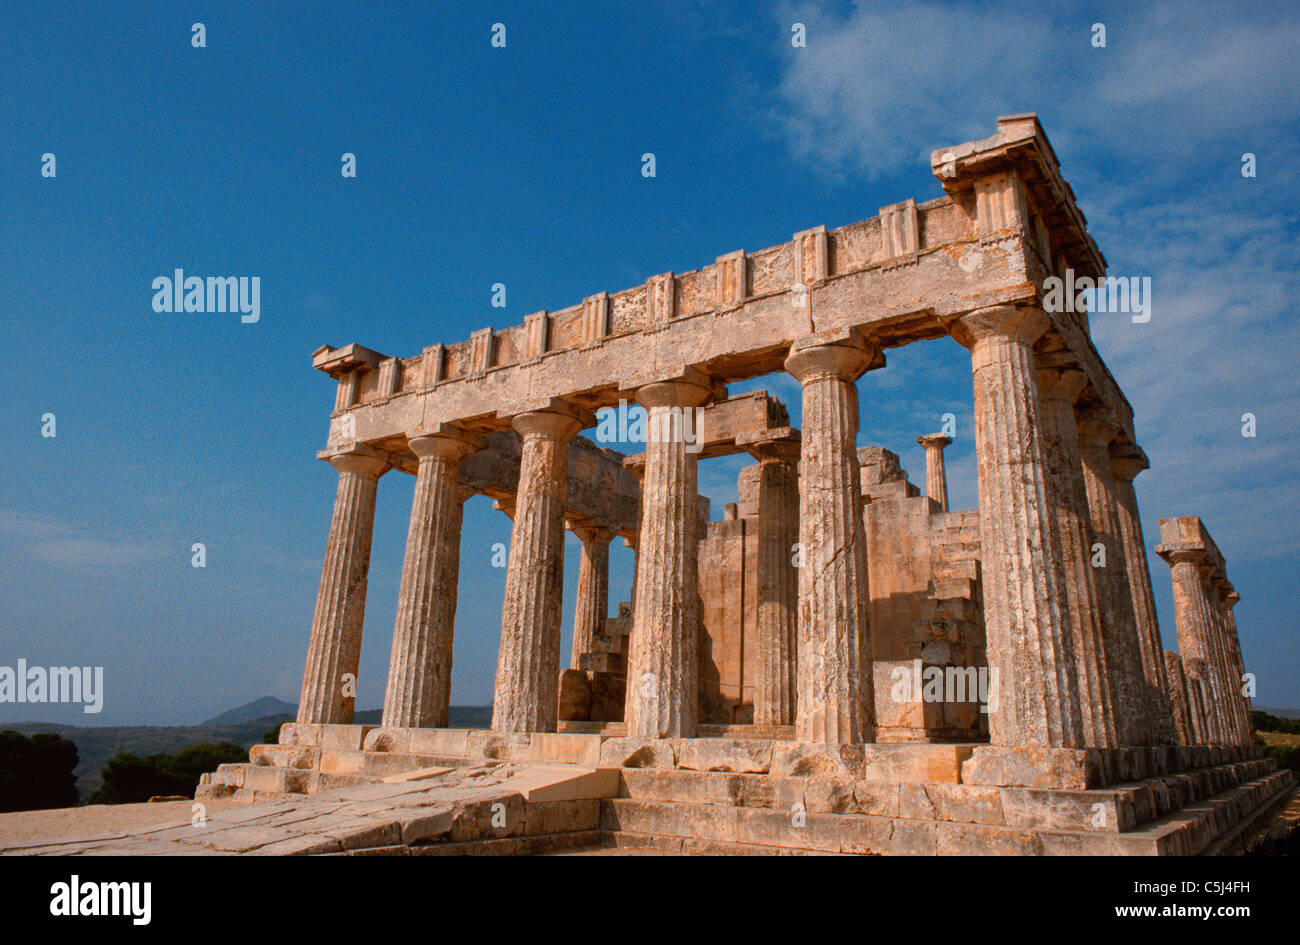 The main frontage of the Temple of Aphaia on the island of Aegina in the Saronic Gulf near Athens, Greece Stock Photo